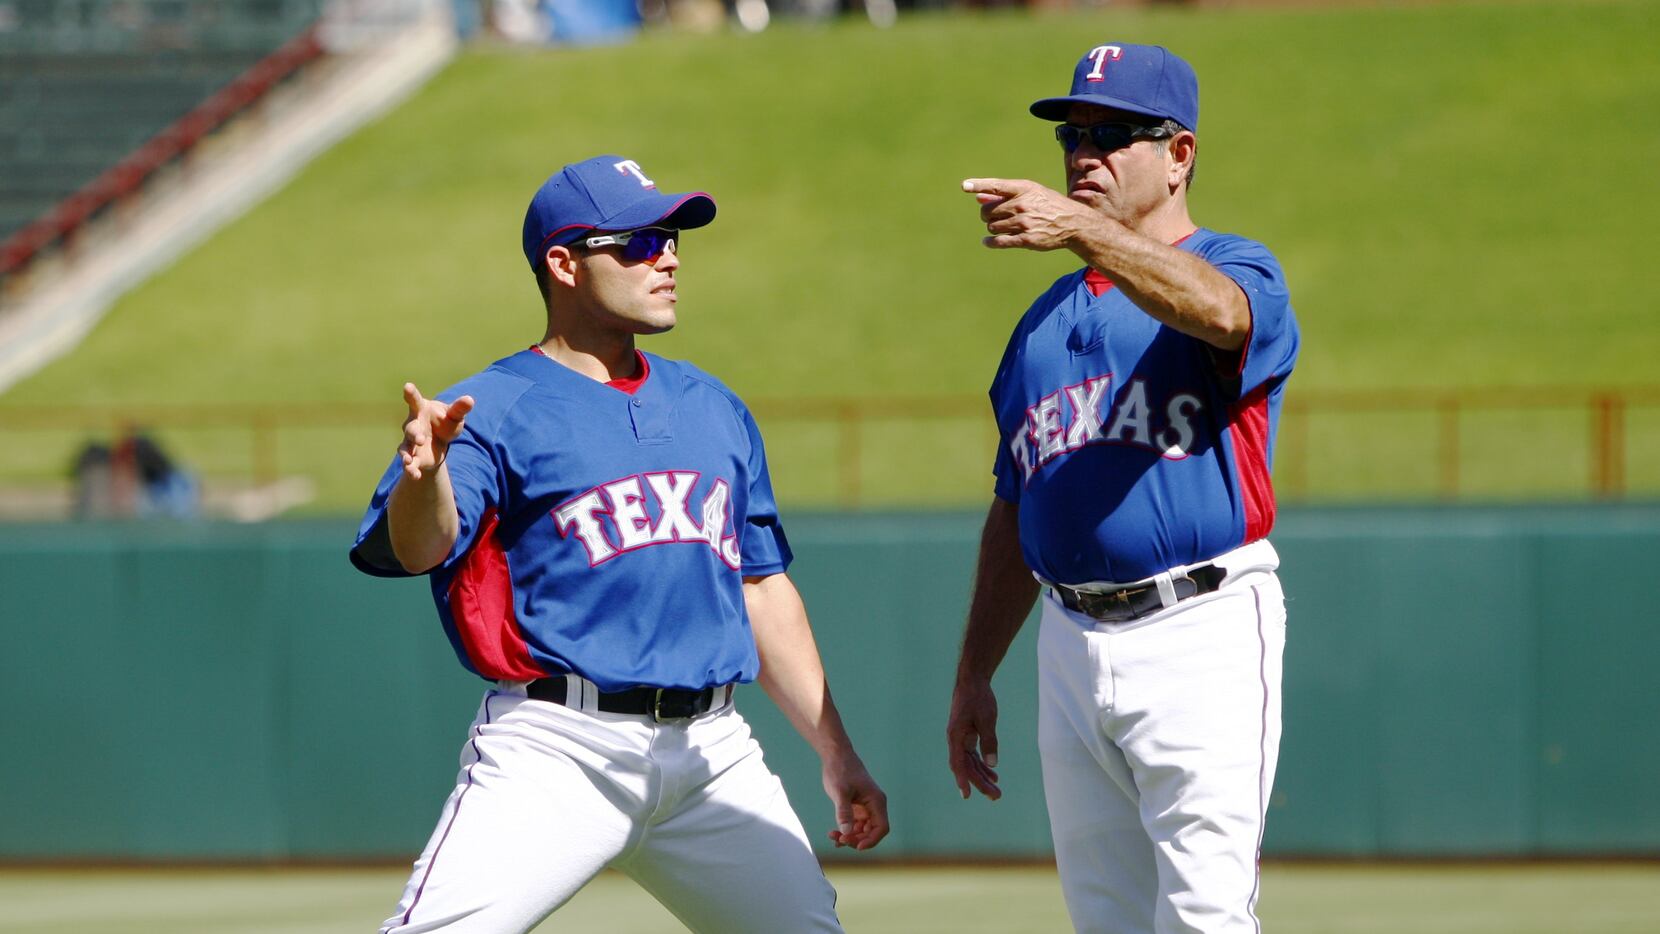 What do the careers of new Hall of Famers Pudge Rodriguez and Jeff